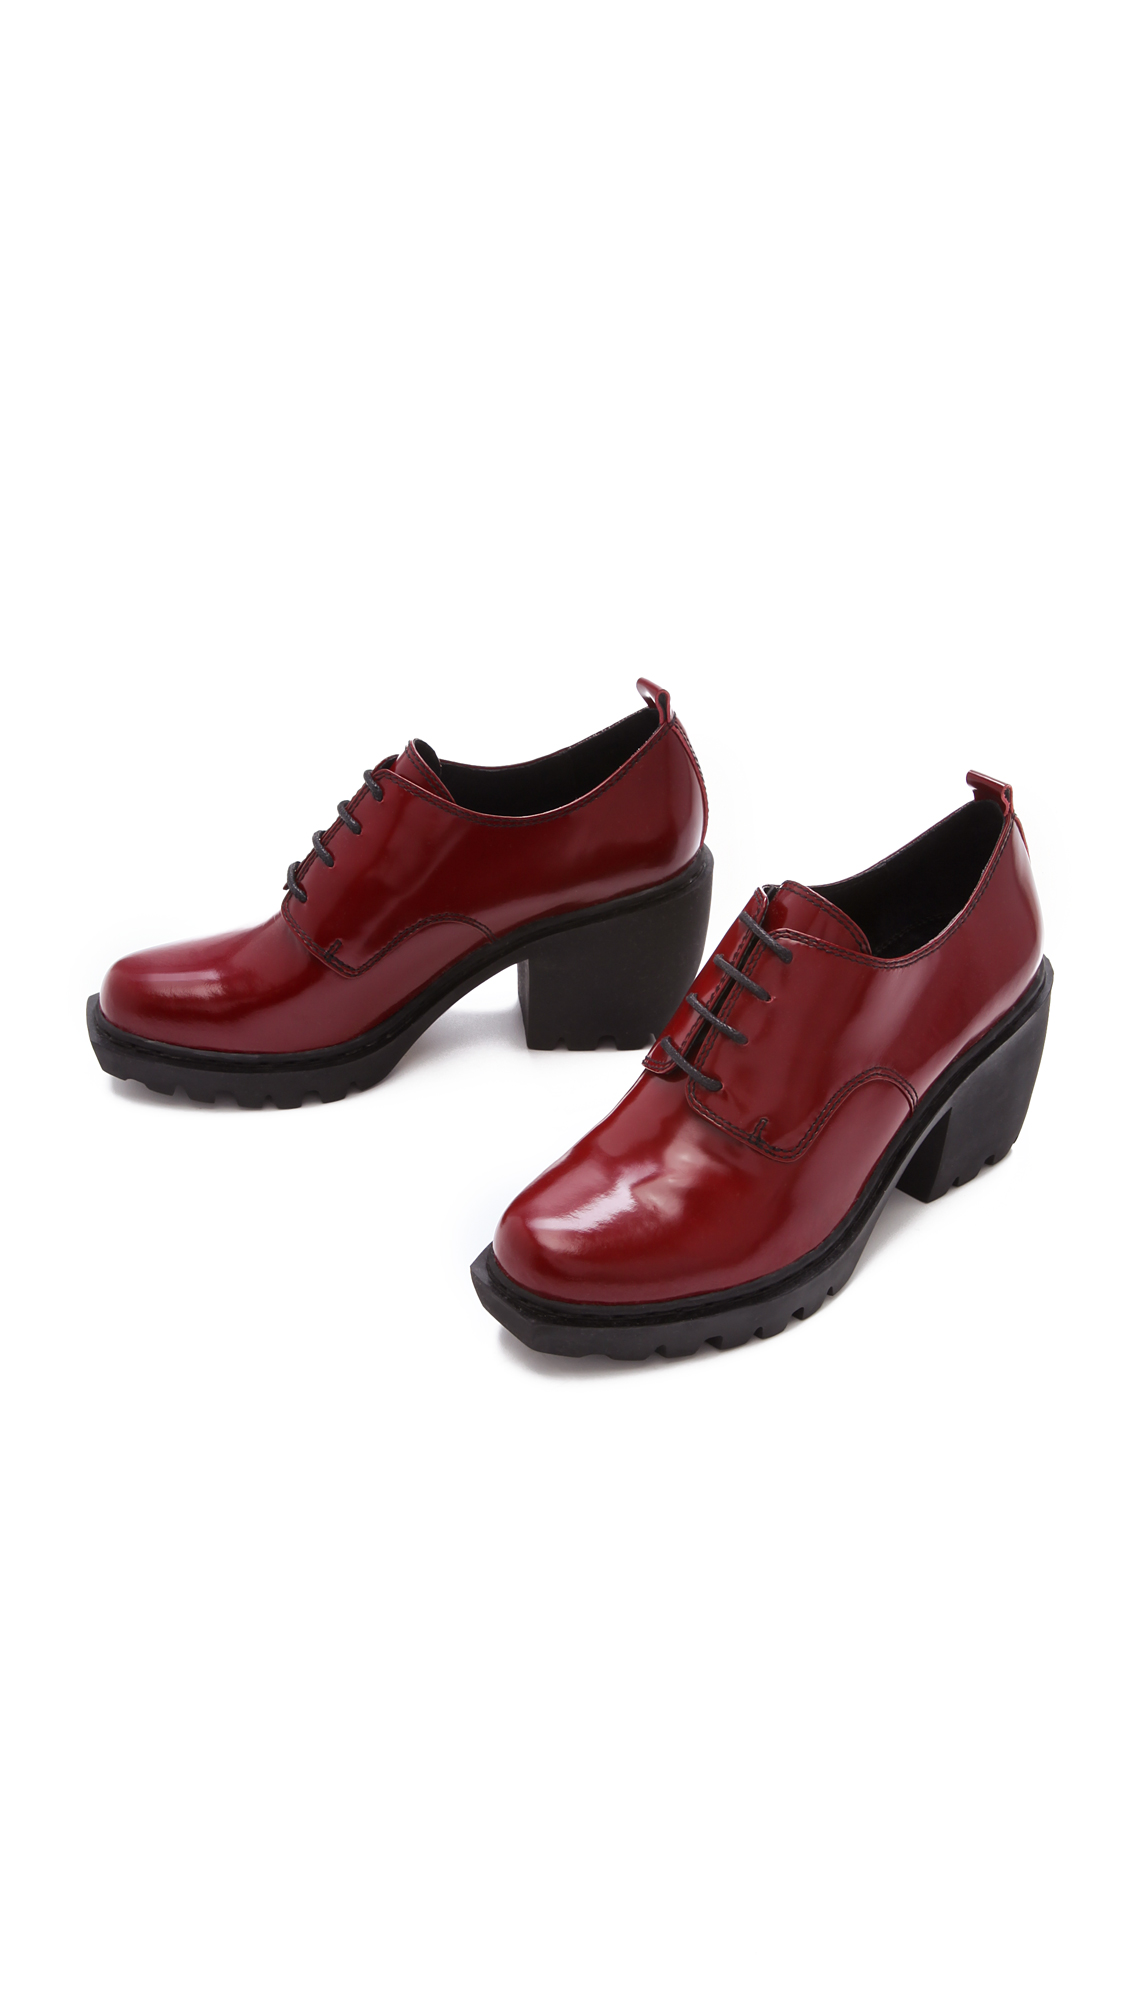 Lyst - Opening Ceremony Grunge Oxford in Red